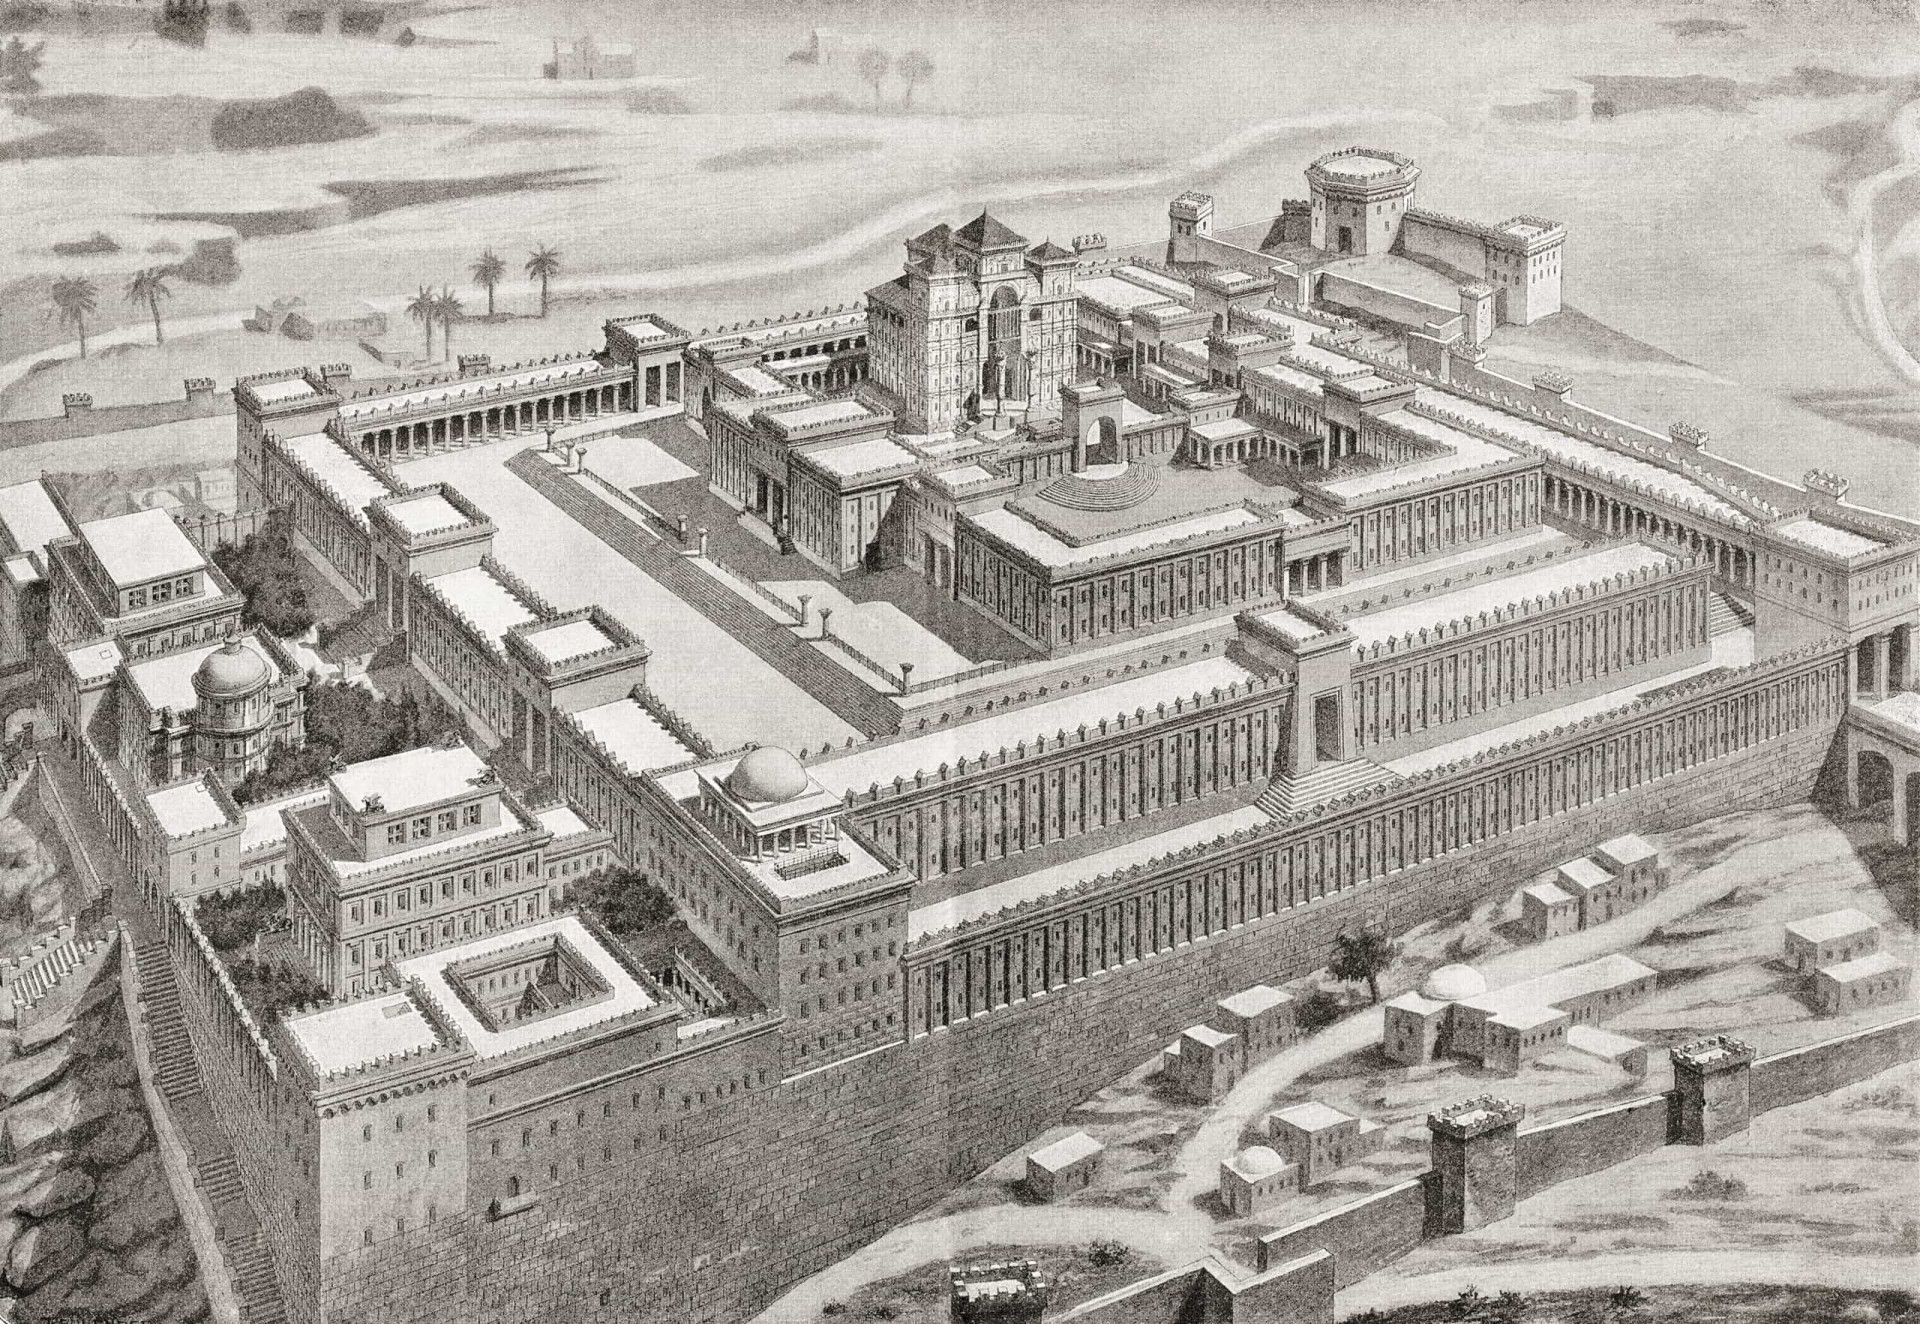 <p>In 597 and 587 BCE, the Babylonian Empire conquered the Israelites. Jerusalem was sacked and the Ark, supposedly stored in the temple, vanished. Pictured is an artist's impression of Solomon's Temple before it was destroyed by Nebuchadnezzar II, King of Babylon, after the Siege of Jerusalem of 587 BCE.</p><p><a href="https://www.msn.com/en-ph/community/channel/vid-7xx8mnucu55yw63we9va2gwr7uihbxwc68fxqp25x6tg4ftibpra?cvid=94631541bc0f4f89bfd59158d696ad7e">Follow us and access great exclusive content every day</a></p>